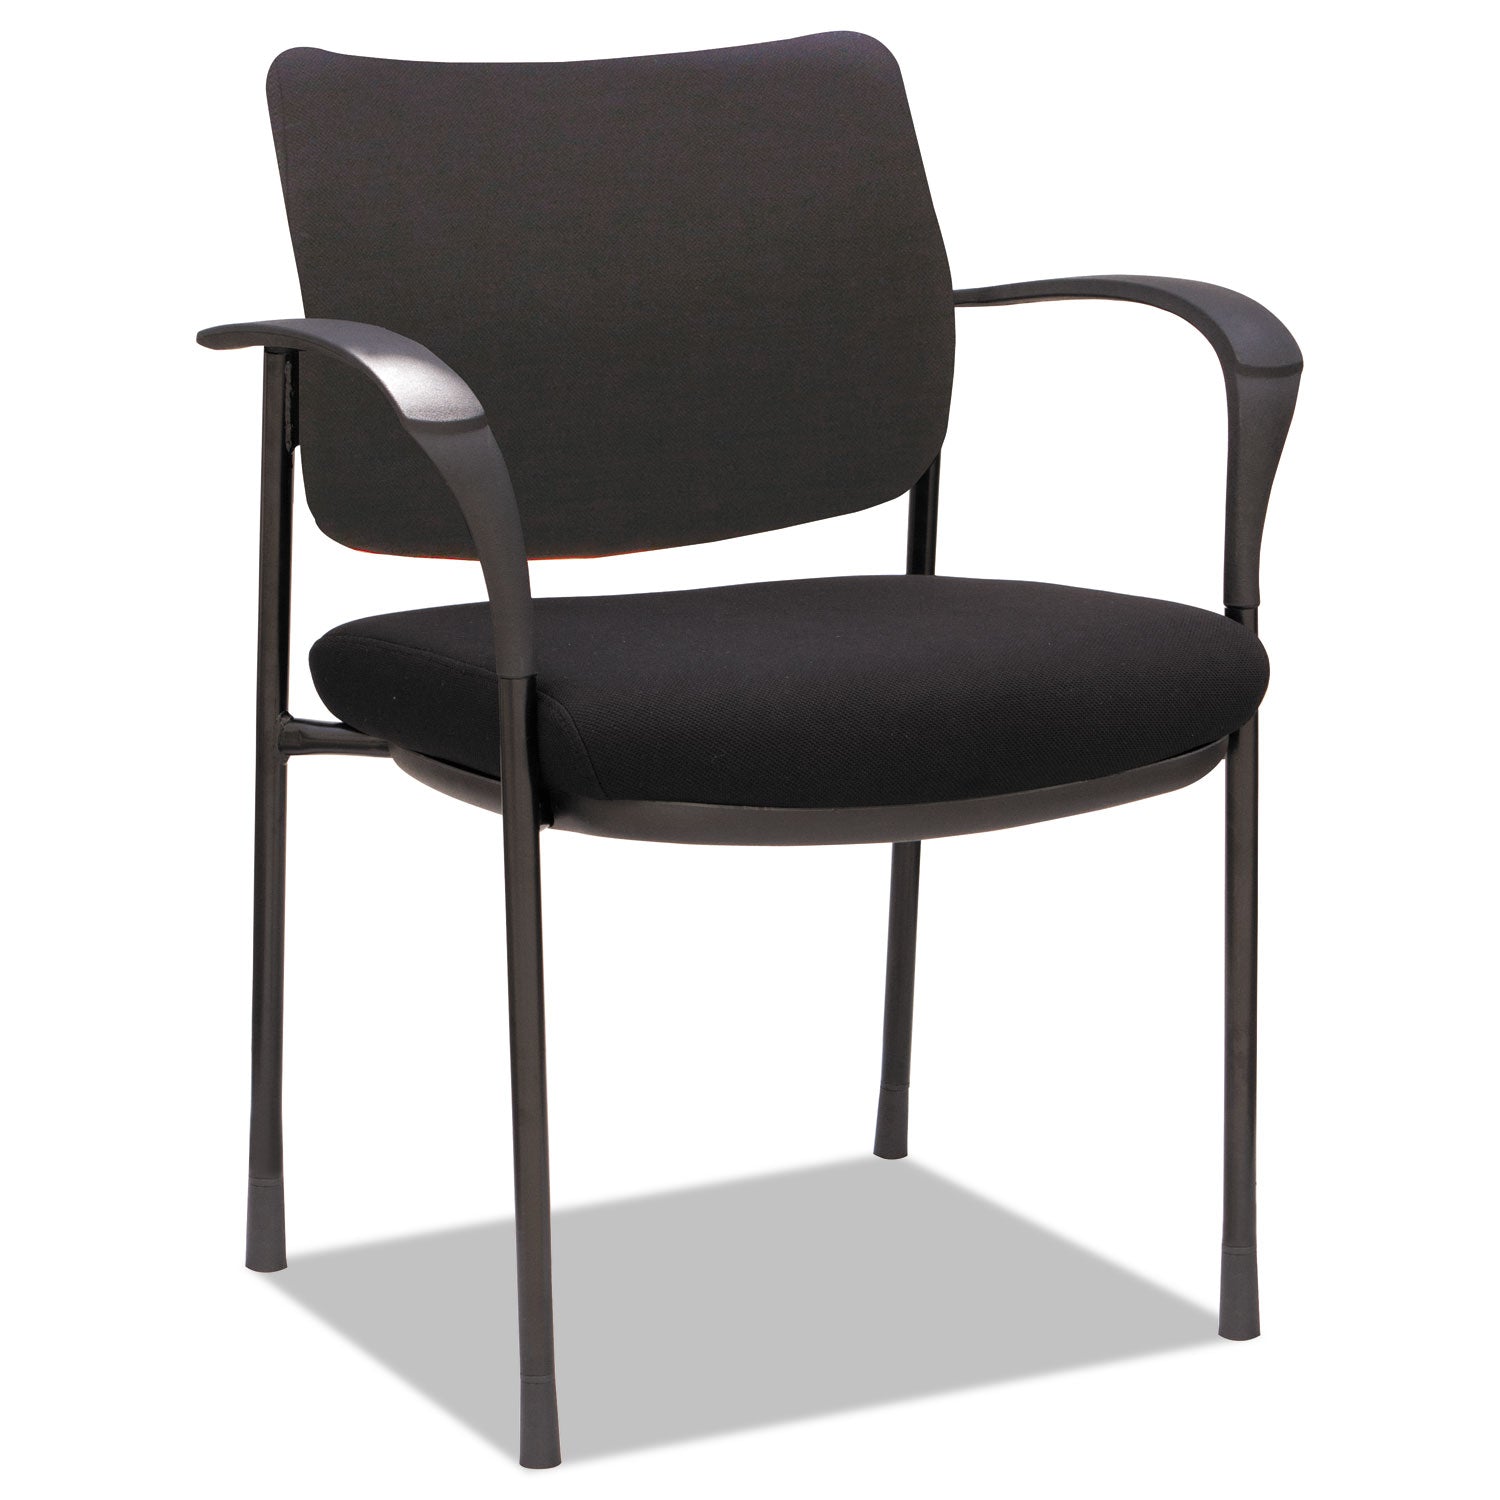 alera-iv-series-fabric-back-seat-guest-chairs-248-x-2283-x-3228-black-seat-black-back-black-base-2-carton_aleiv4317a - 1